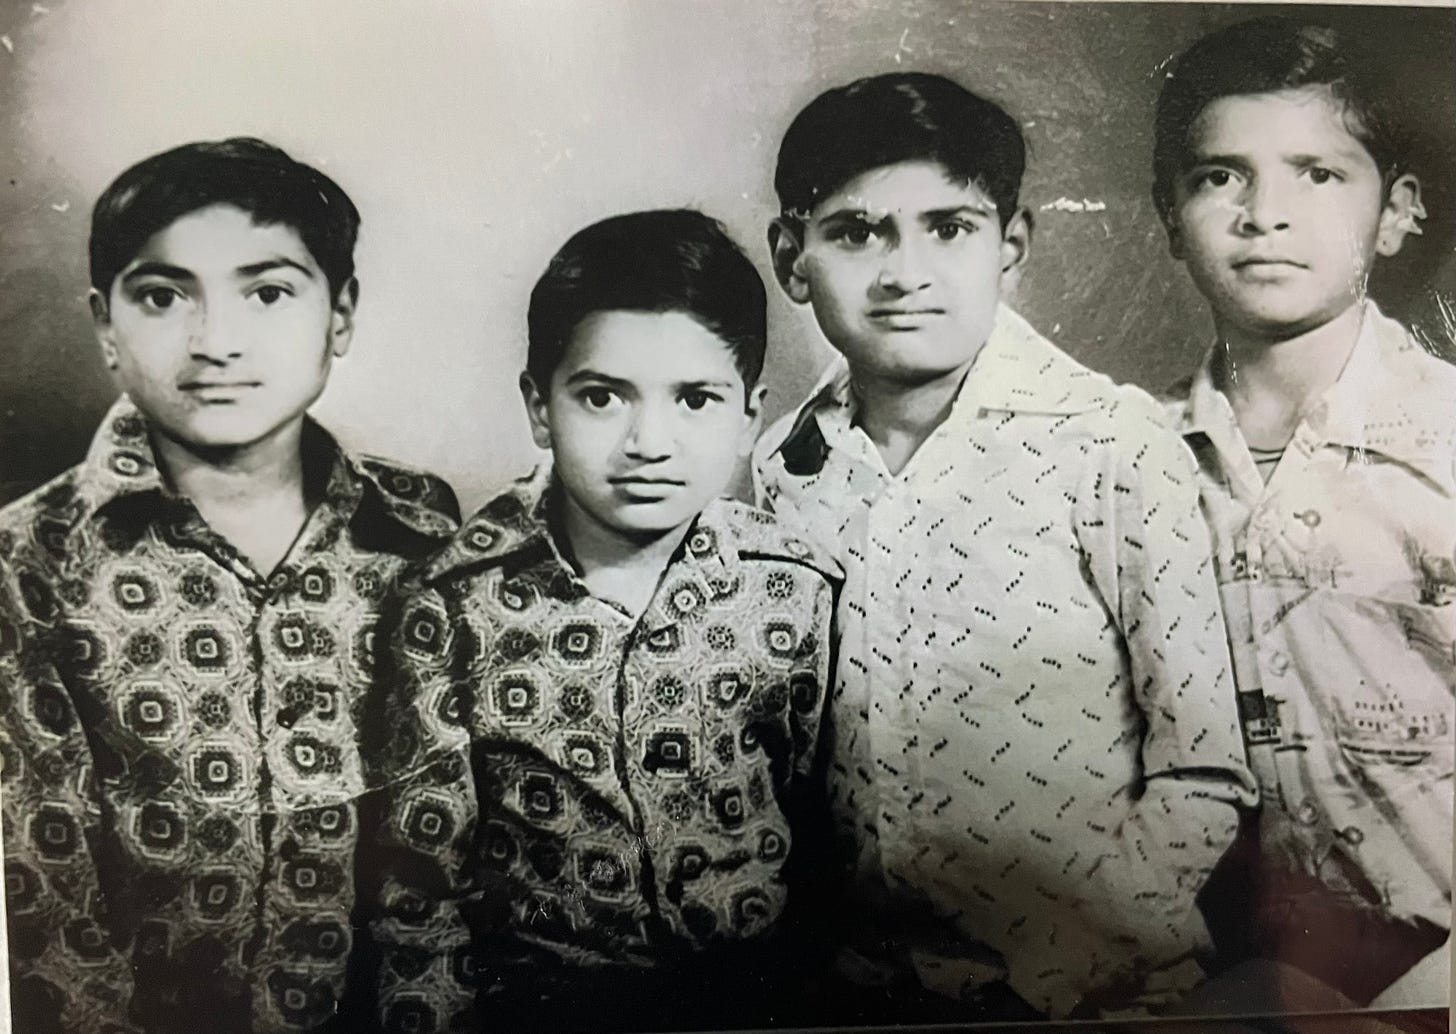 A black-and-white photo of a group of four Indian boys, each wearing a patterned long-sleeved shirt. 